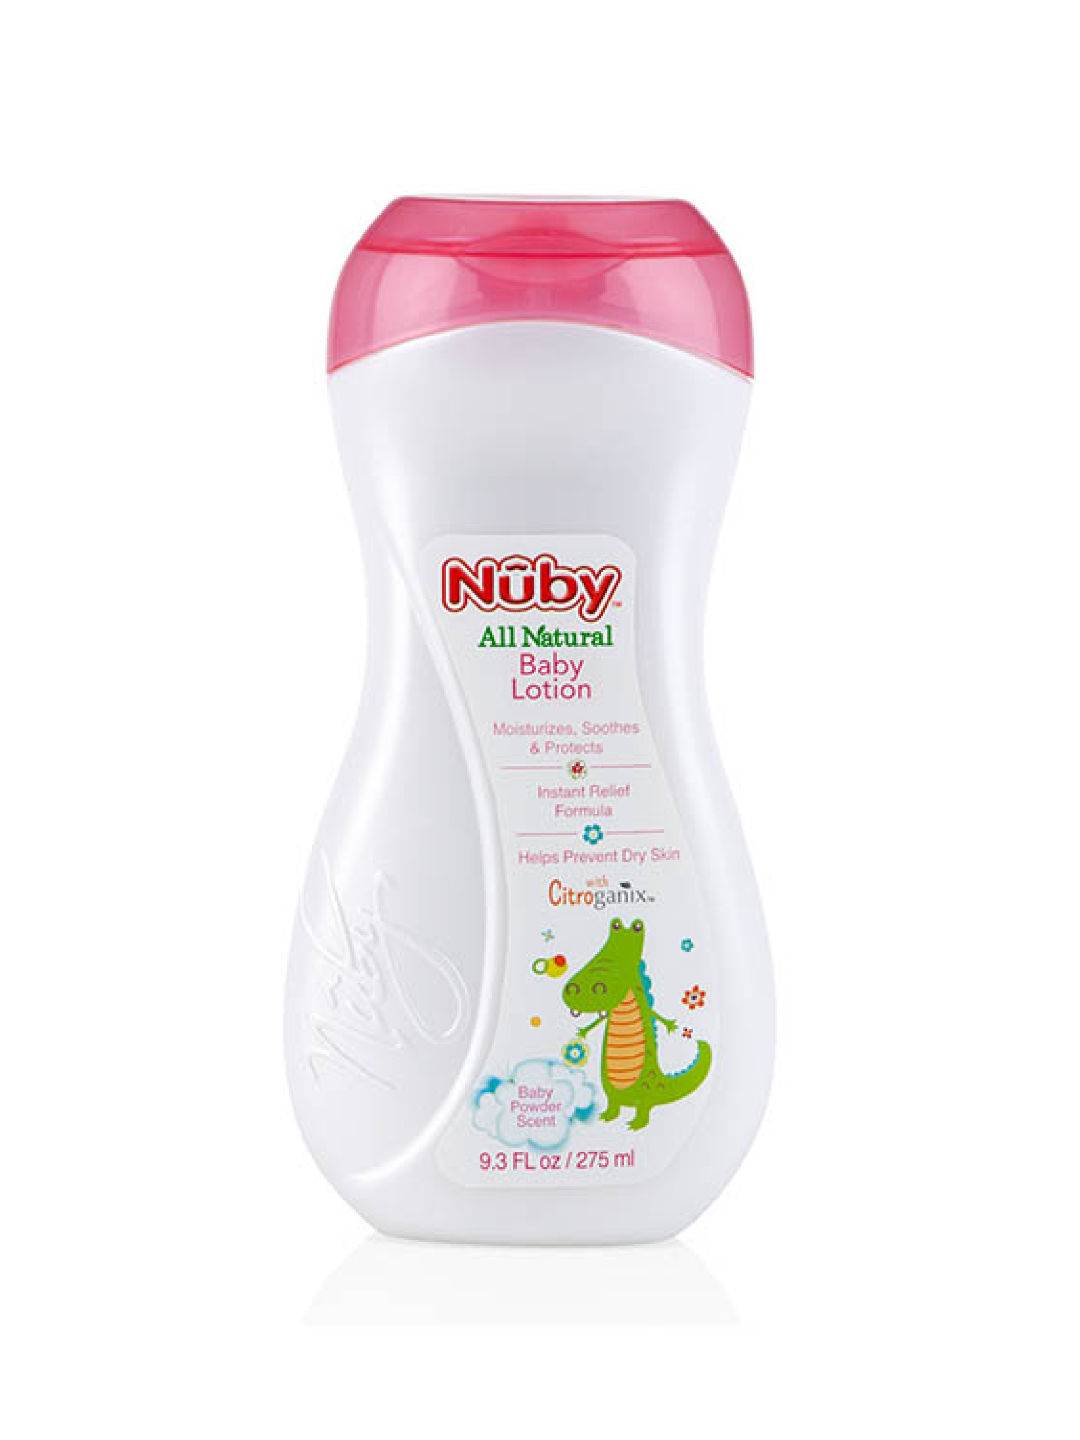 Nuby Citroganix All Natural Baby Lotion (275ml)